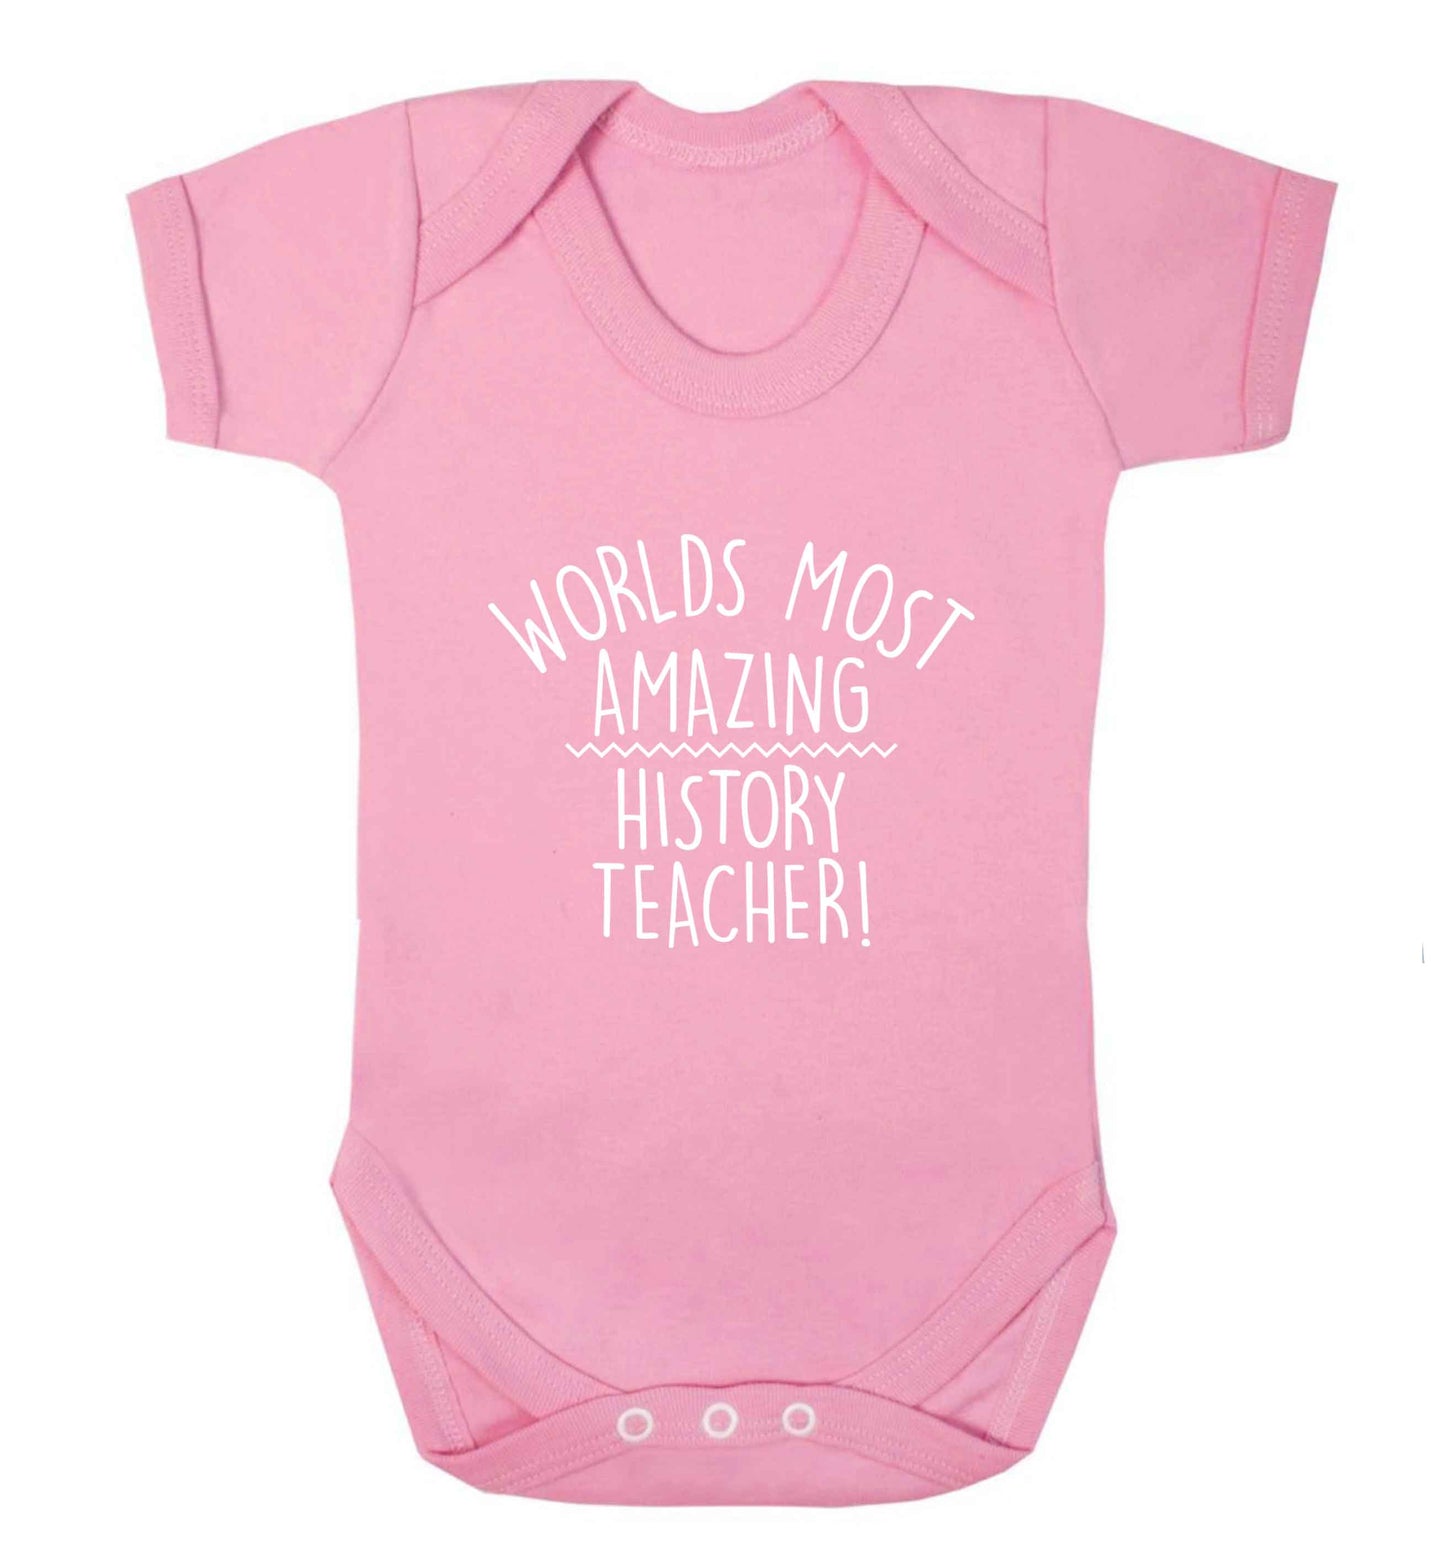 Worlds most amazing History teacher baby vest pale pink 18-24 months